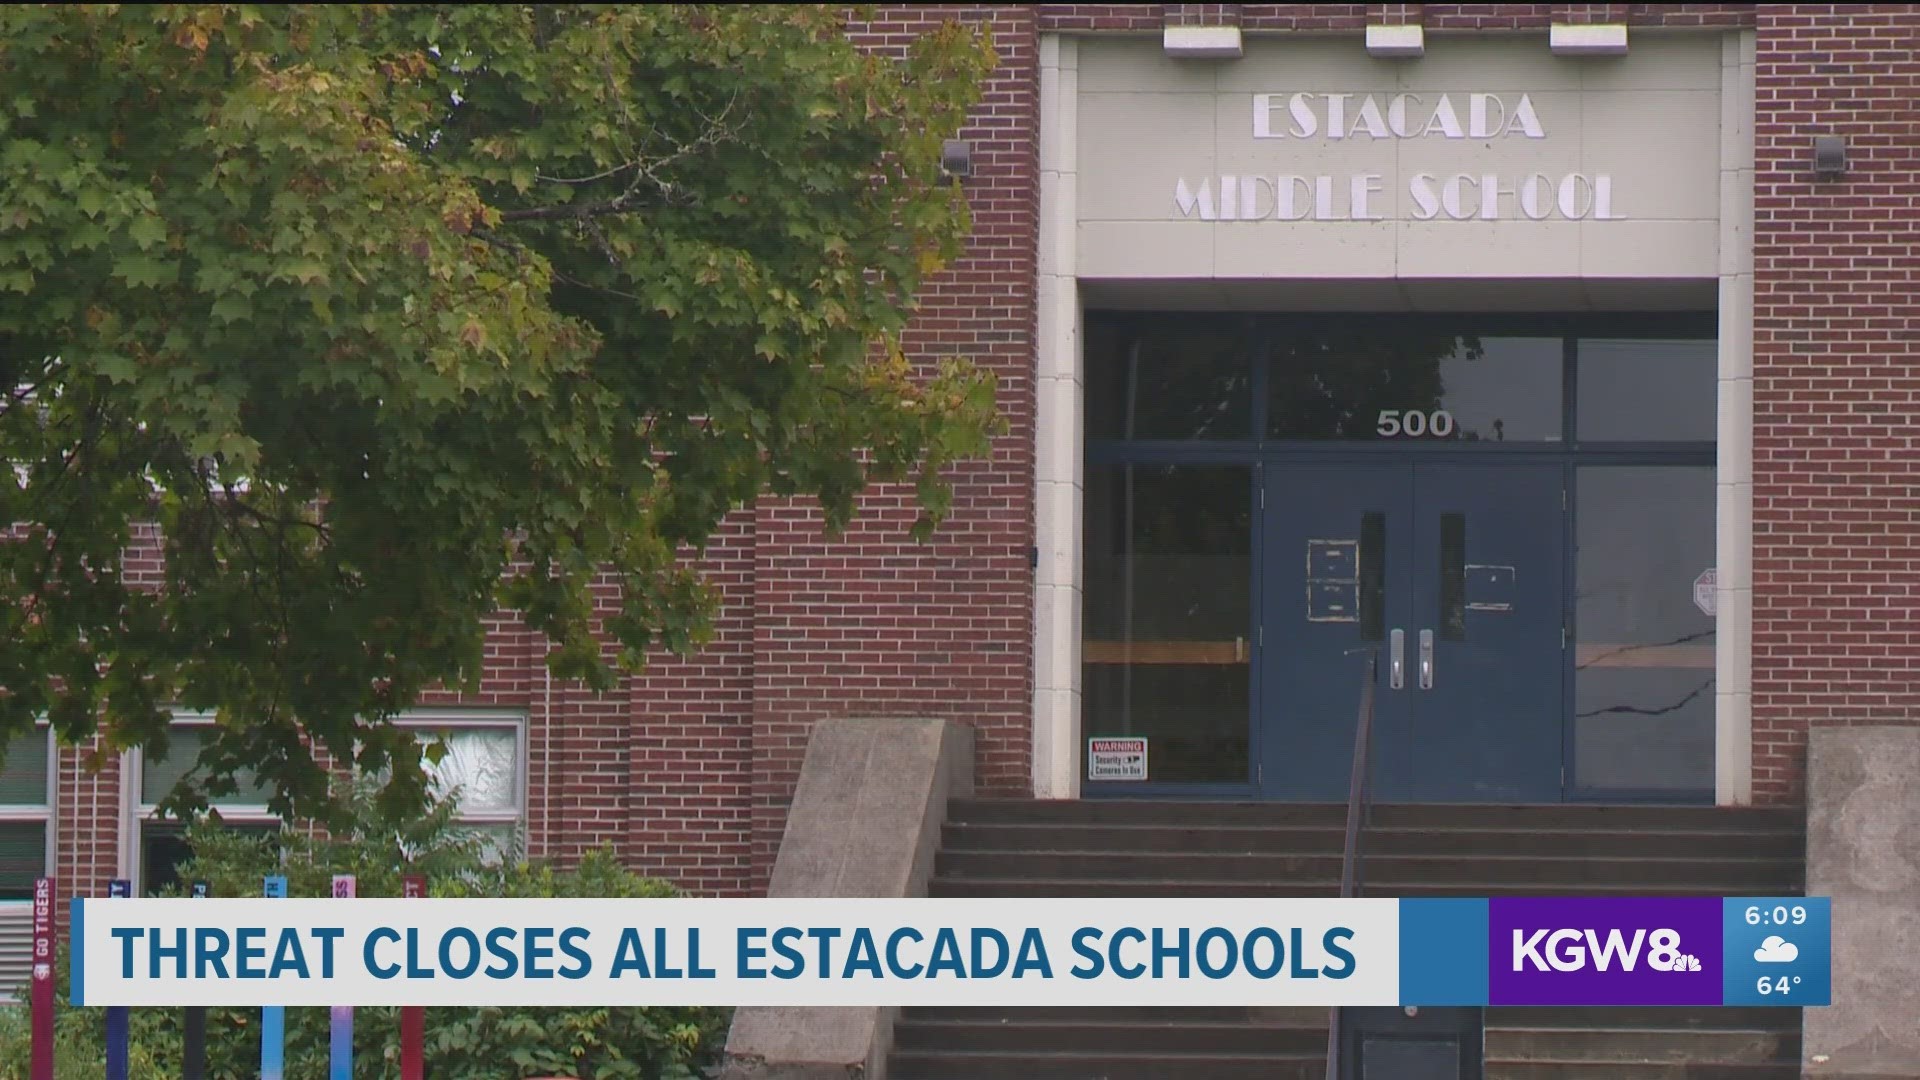 The Estacada School District canceled all classes on Wednesday out of an abundance of caution. This comes just over a week after threats at a Tualatin middle school.